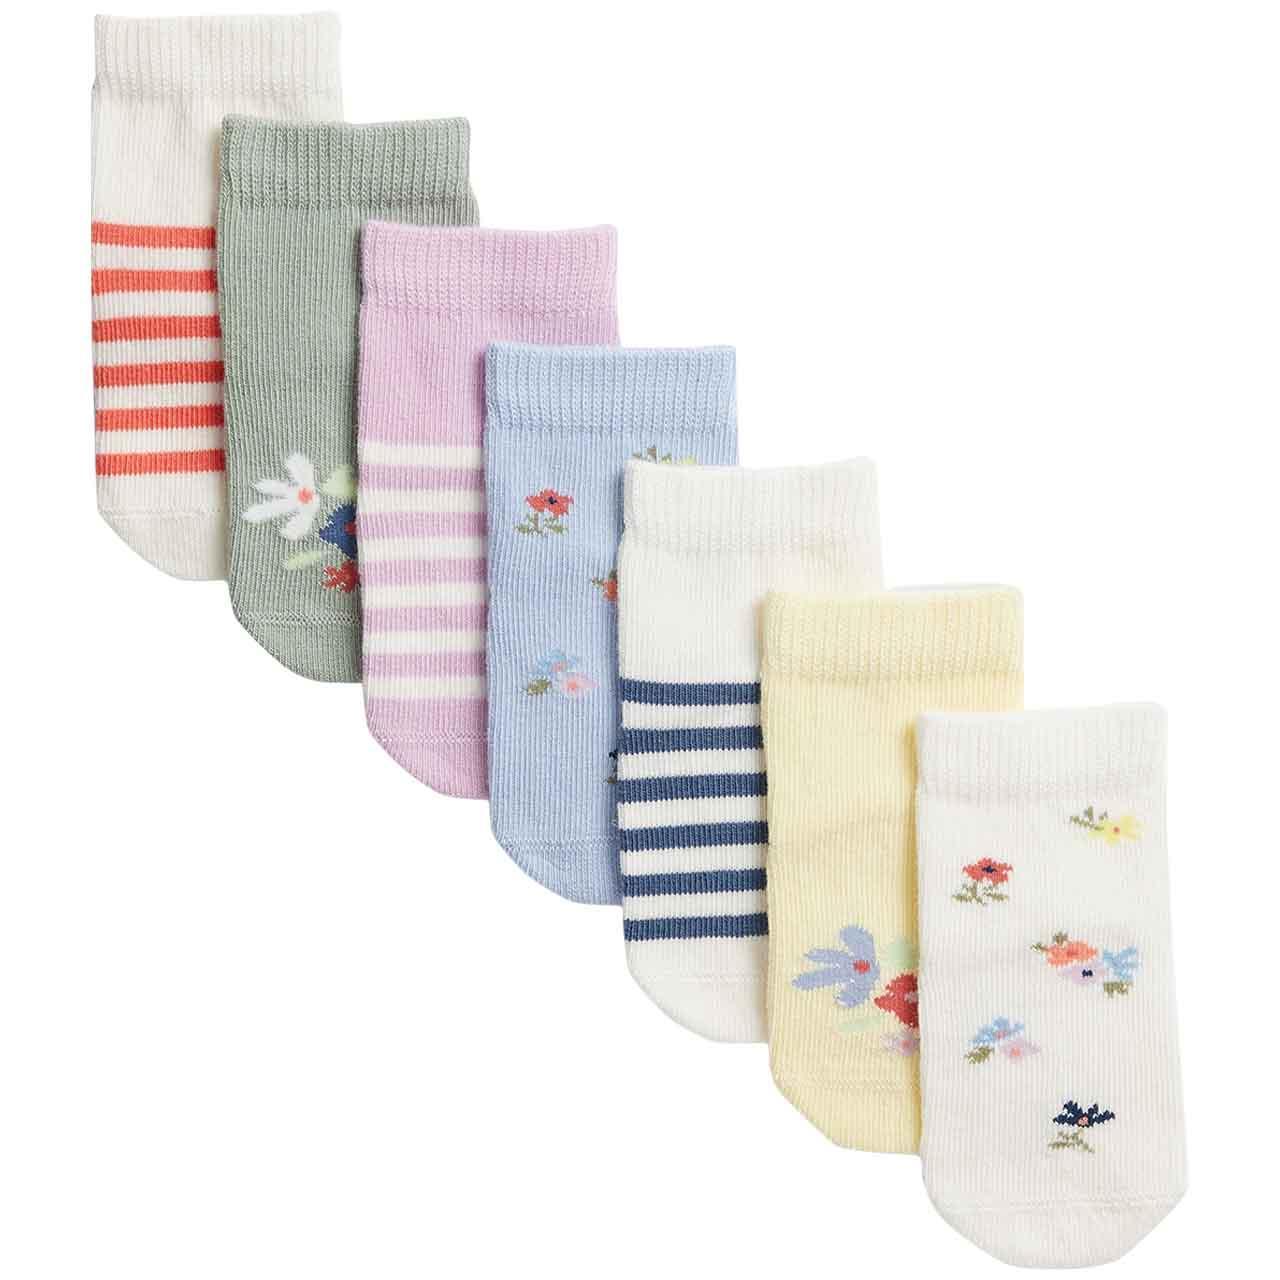 M&S Girls, Cotton Rich Patterned Socks 6-12, 7 Pack